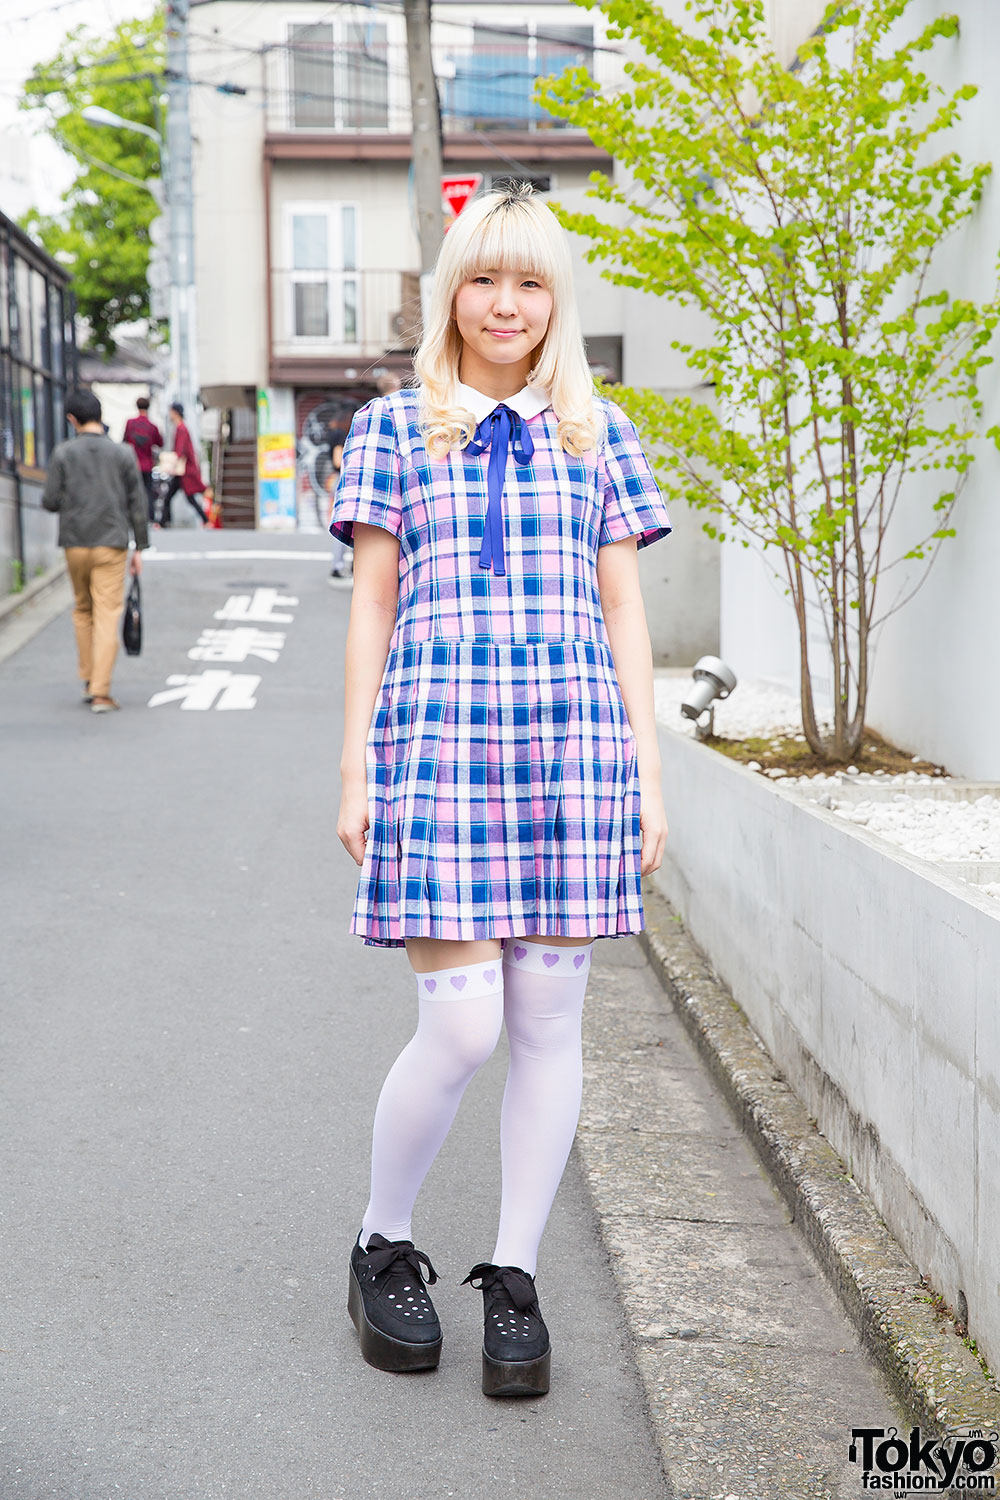 Harajuku Girl in Candy Stripper Plaid Dress, Over-The-Knee Socks  Ribbon-Laced  Platforms – Tokyo Fashion